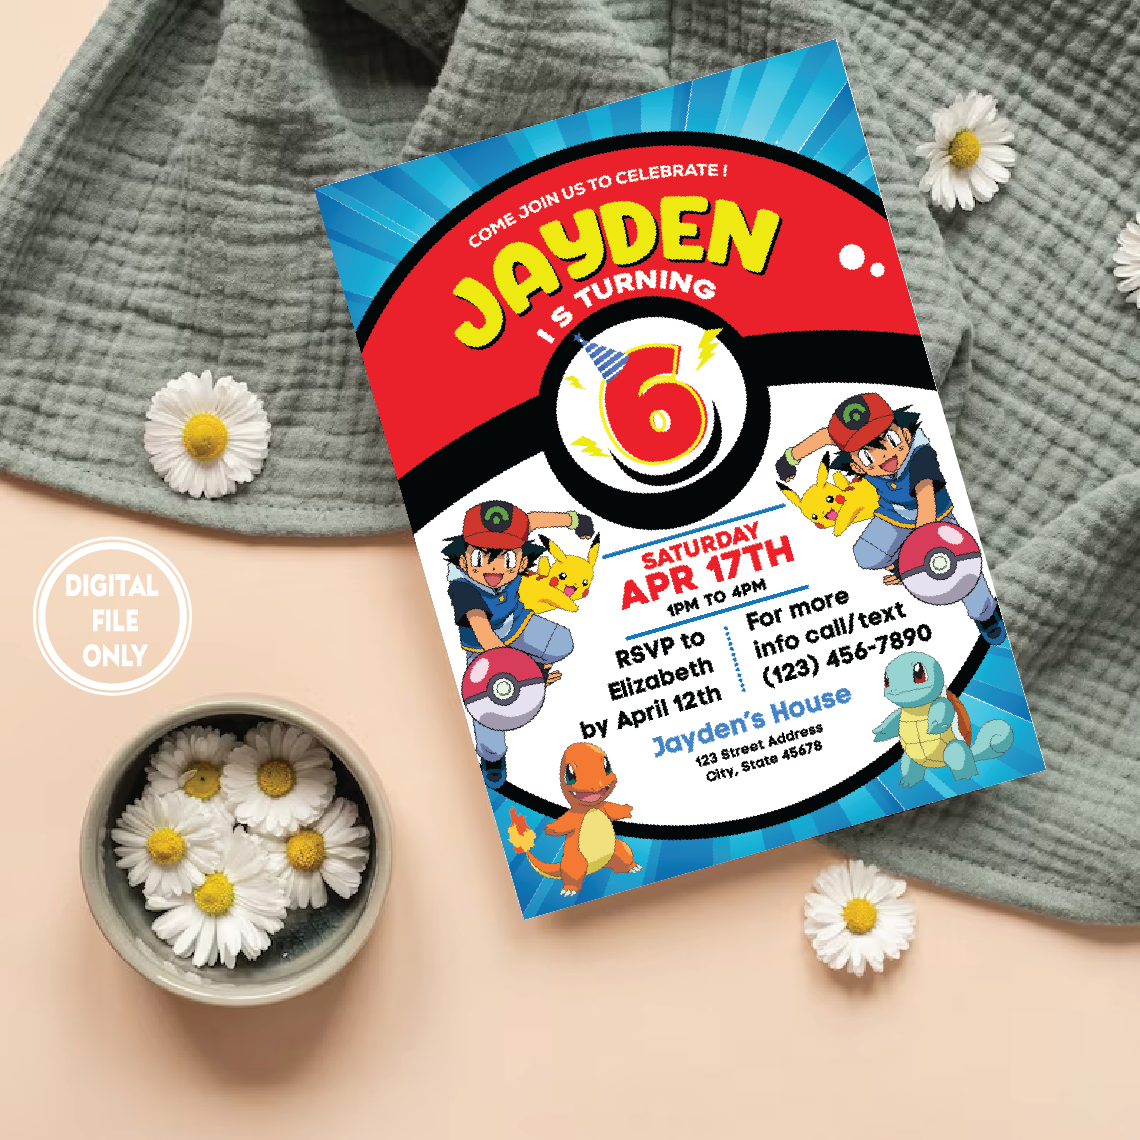 Personalized File Pokemone Birthday Invitation Digital, Instant Download, Printable, For Twins, Pikachu Invitation Digital, Invite, Party PNG File Only